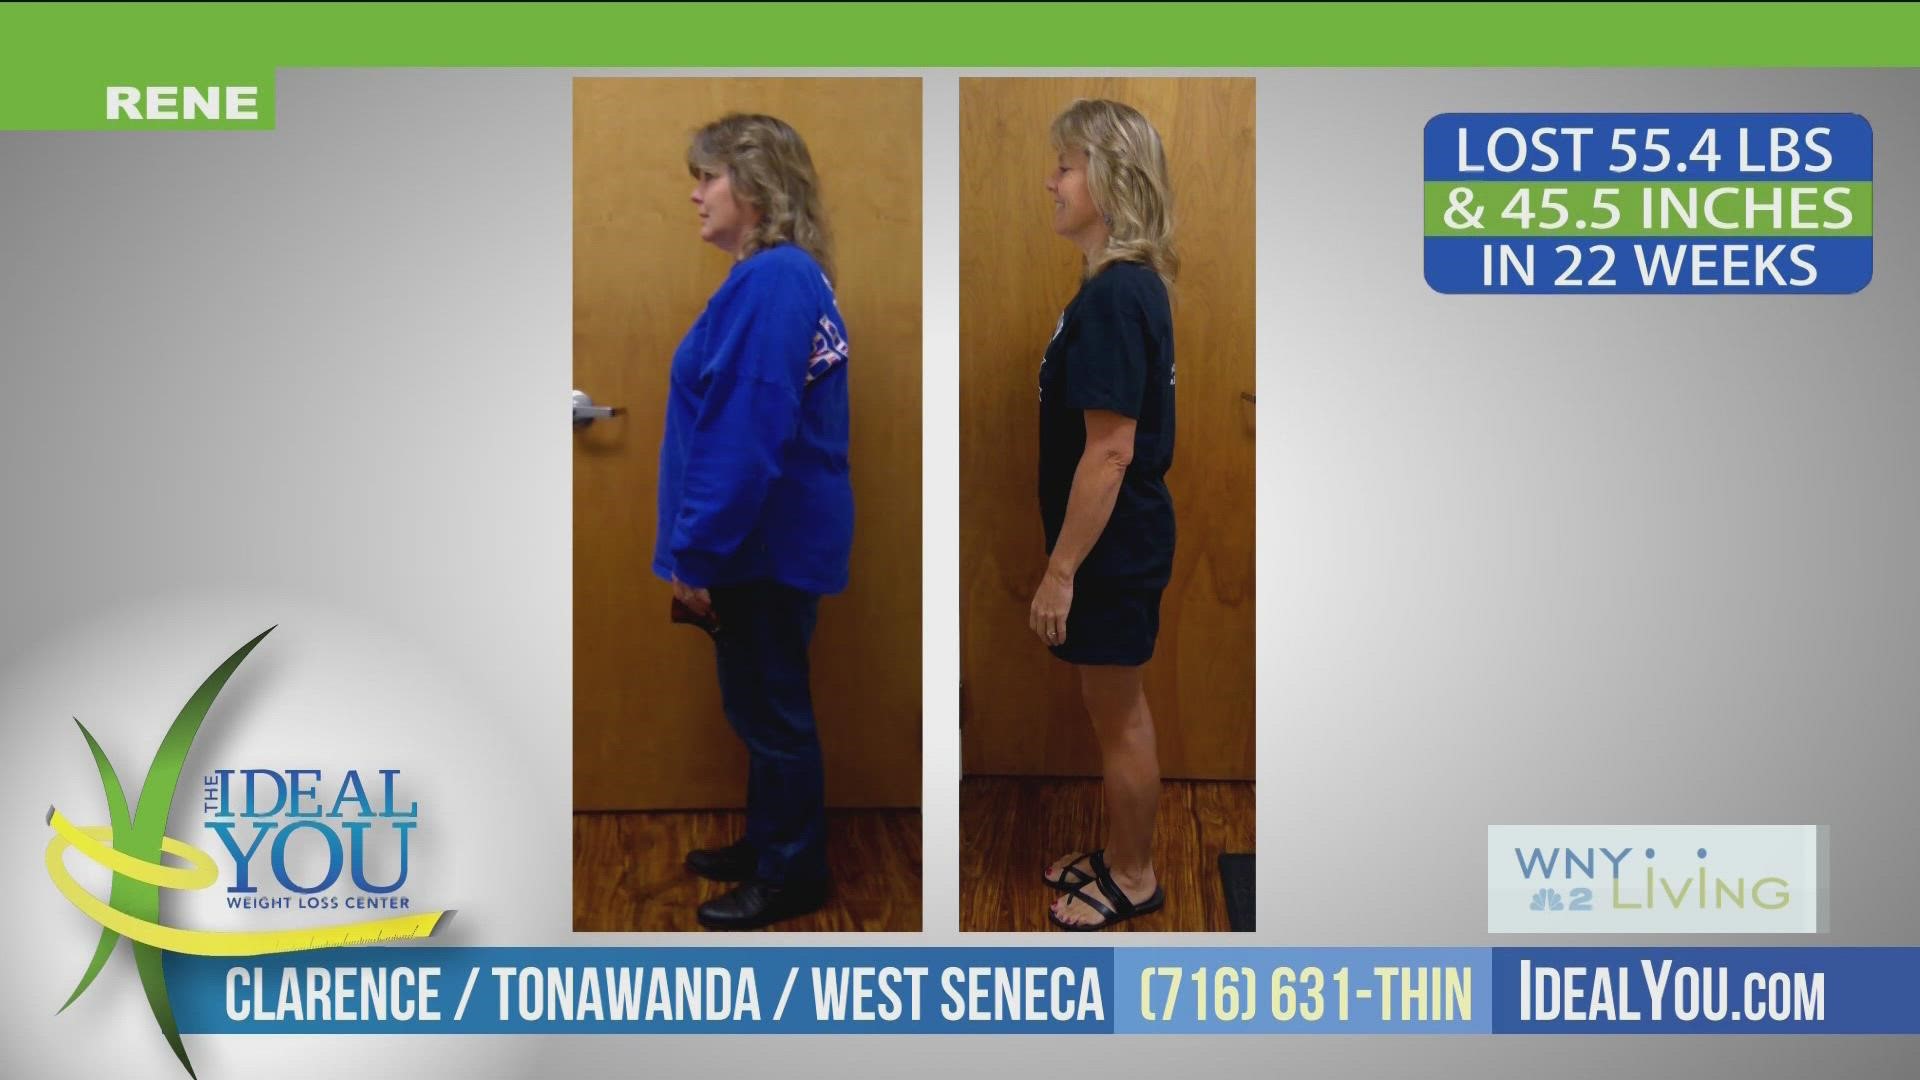 WNY Living - January 7 - The Ideal You Weight Loss Center (THIS VIDEO IS SPONSORED BY THE IDEAL YOU WEIGHT LOSS CENTER)